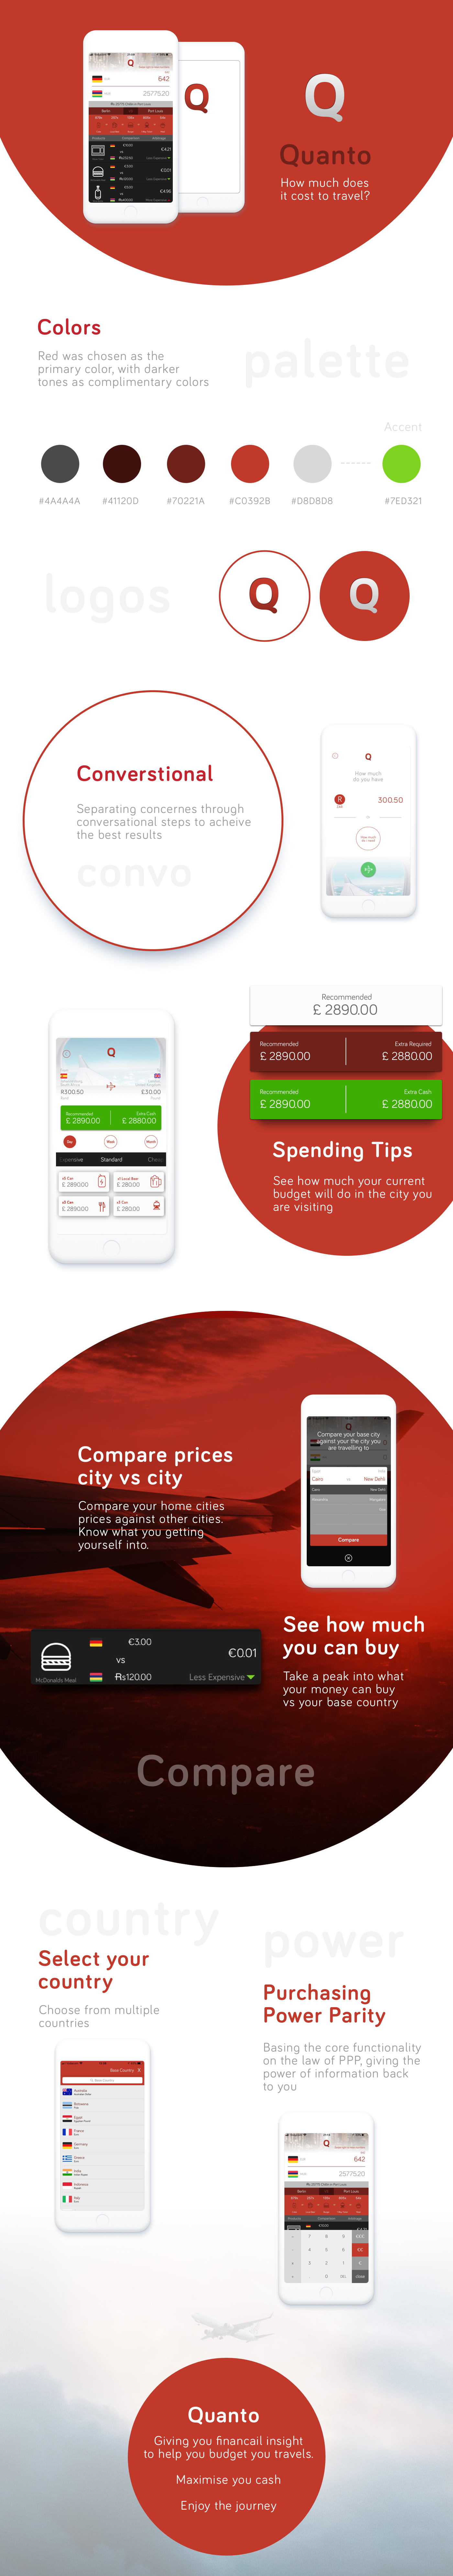 Travel currency purchasing power ios ux Budget cost of living